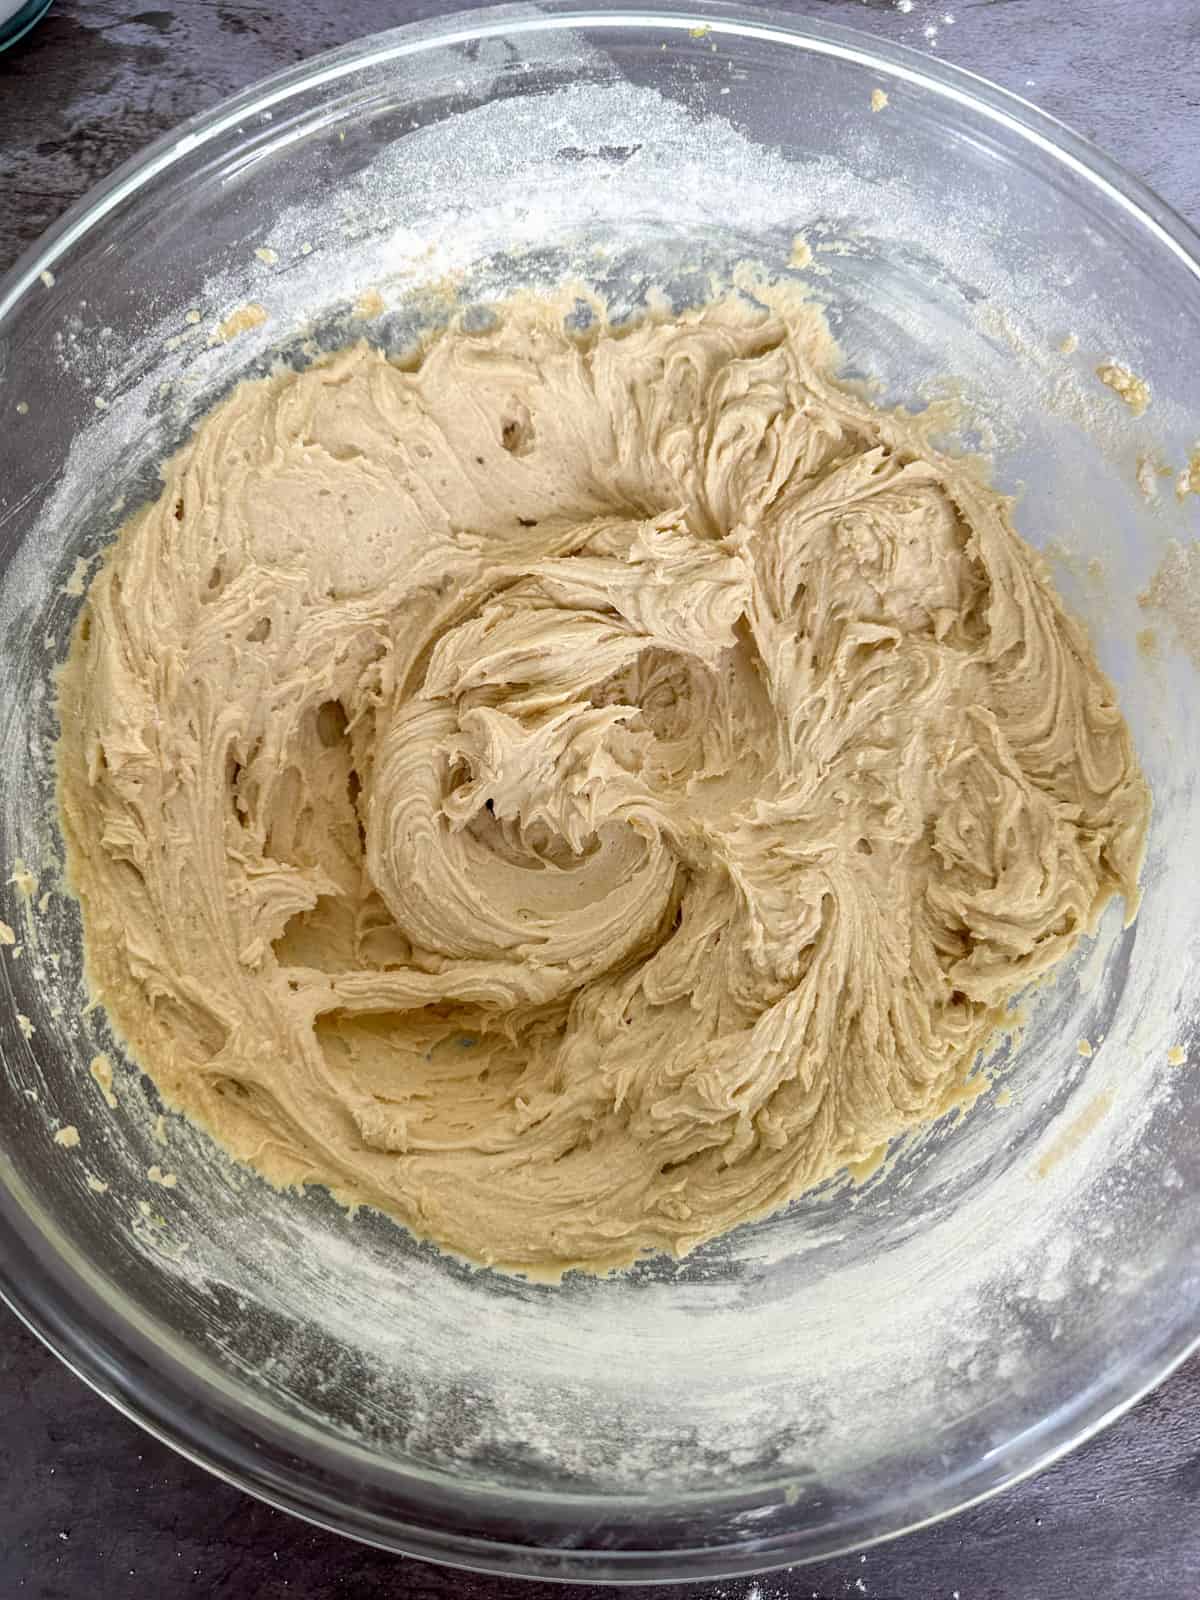 the batter mixed together without raspberries